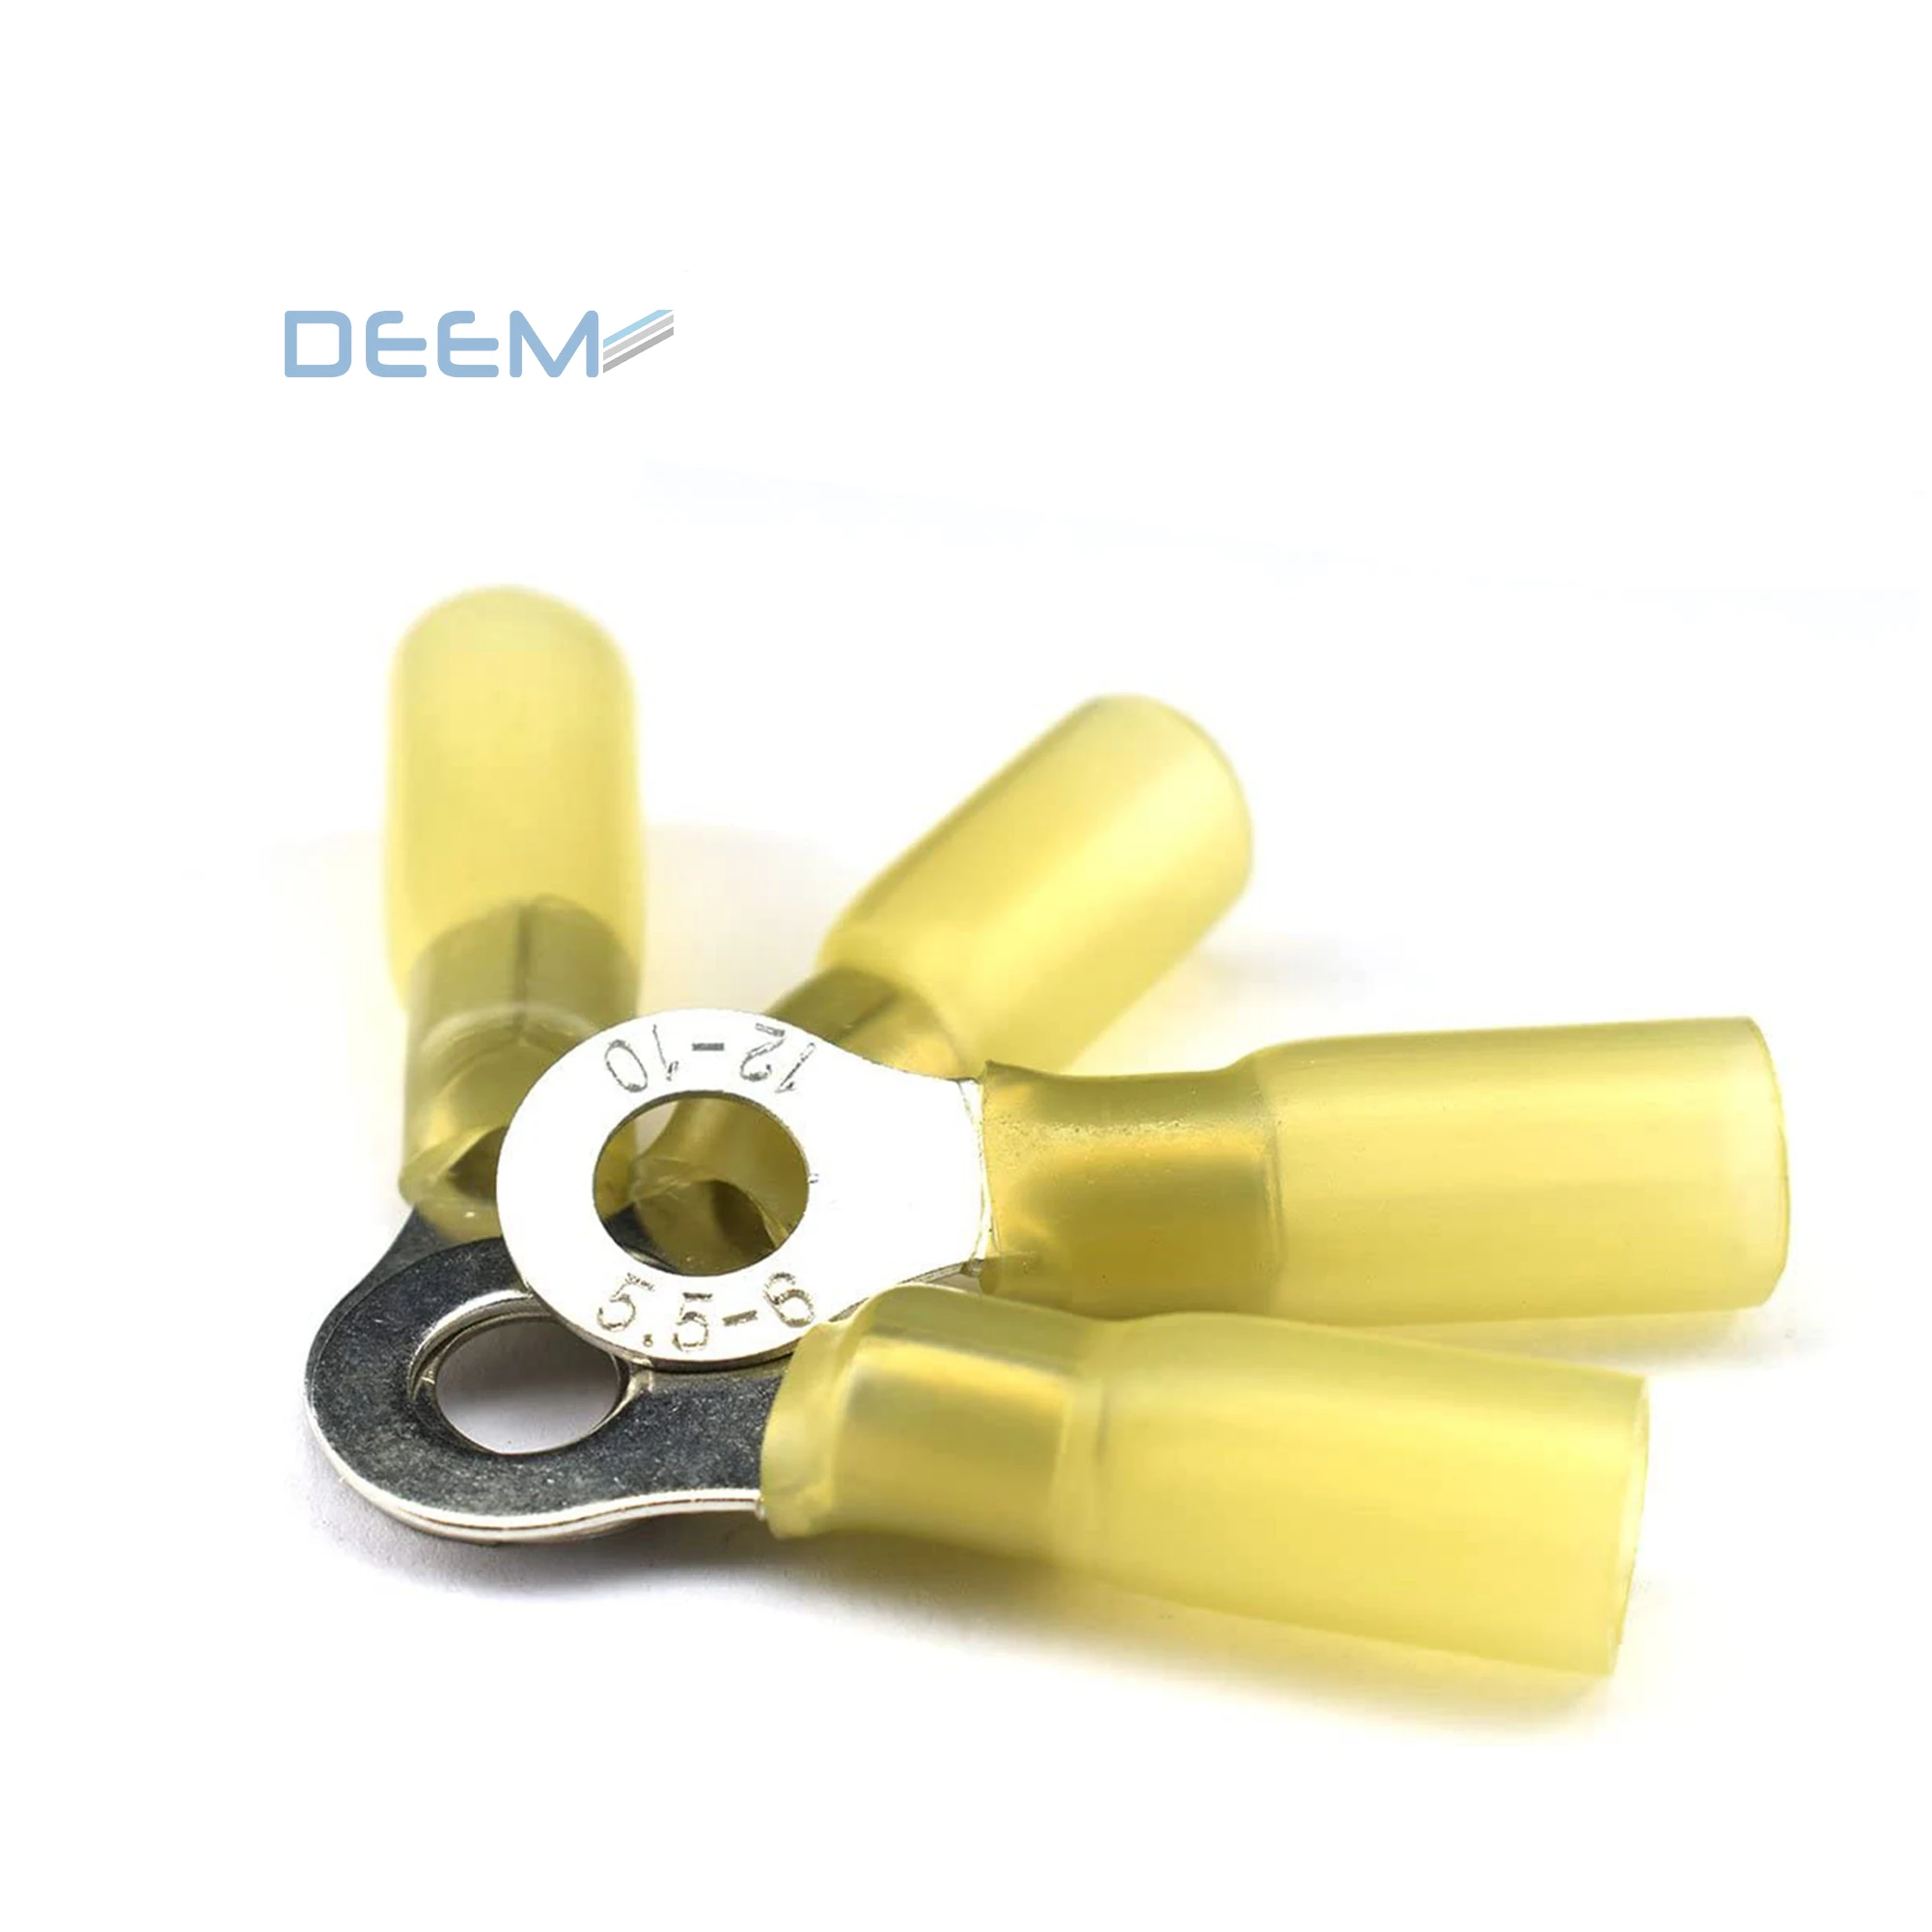 DEEM waterproof heat shrink crimp ring terminal connector for wire insulation